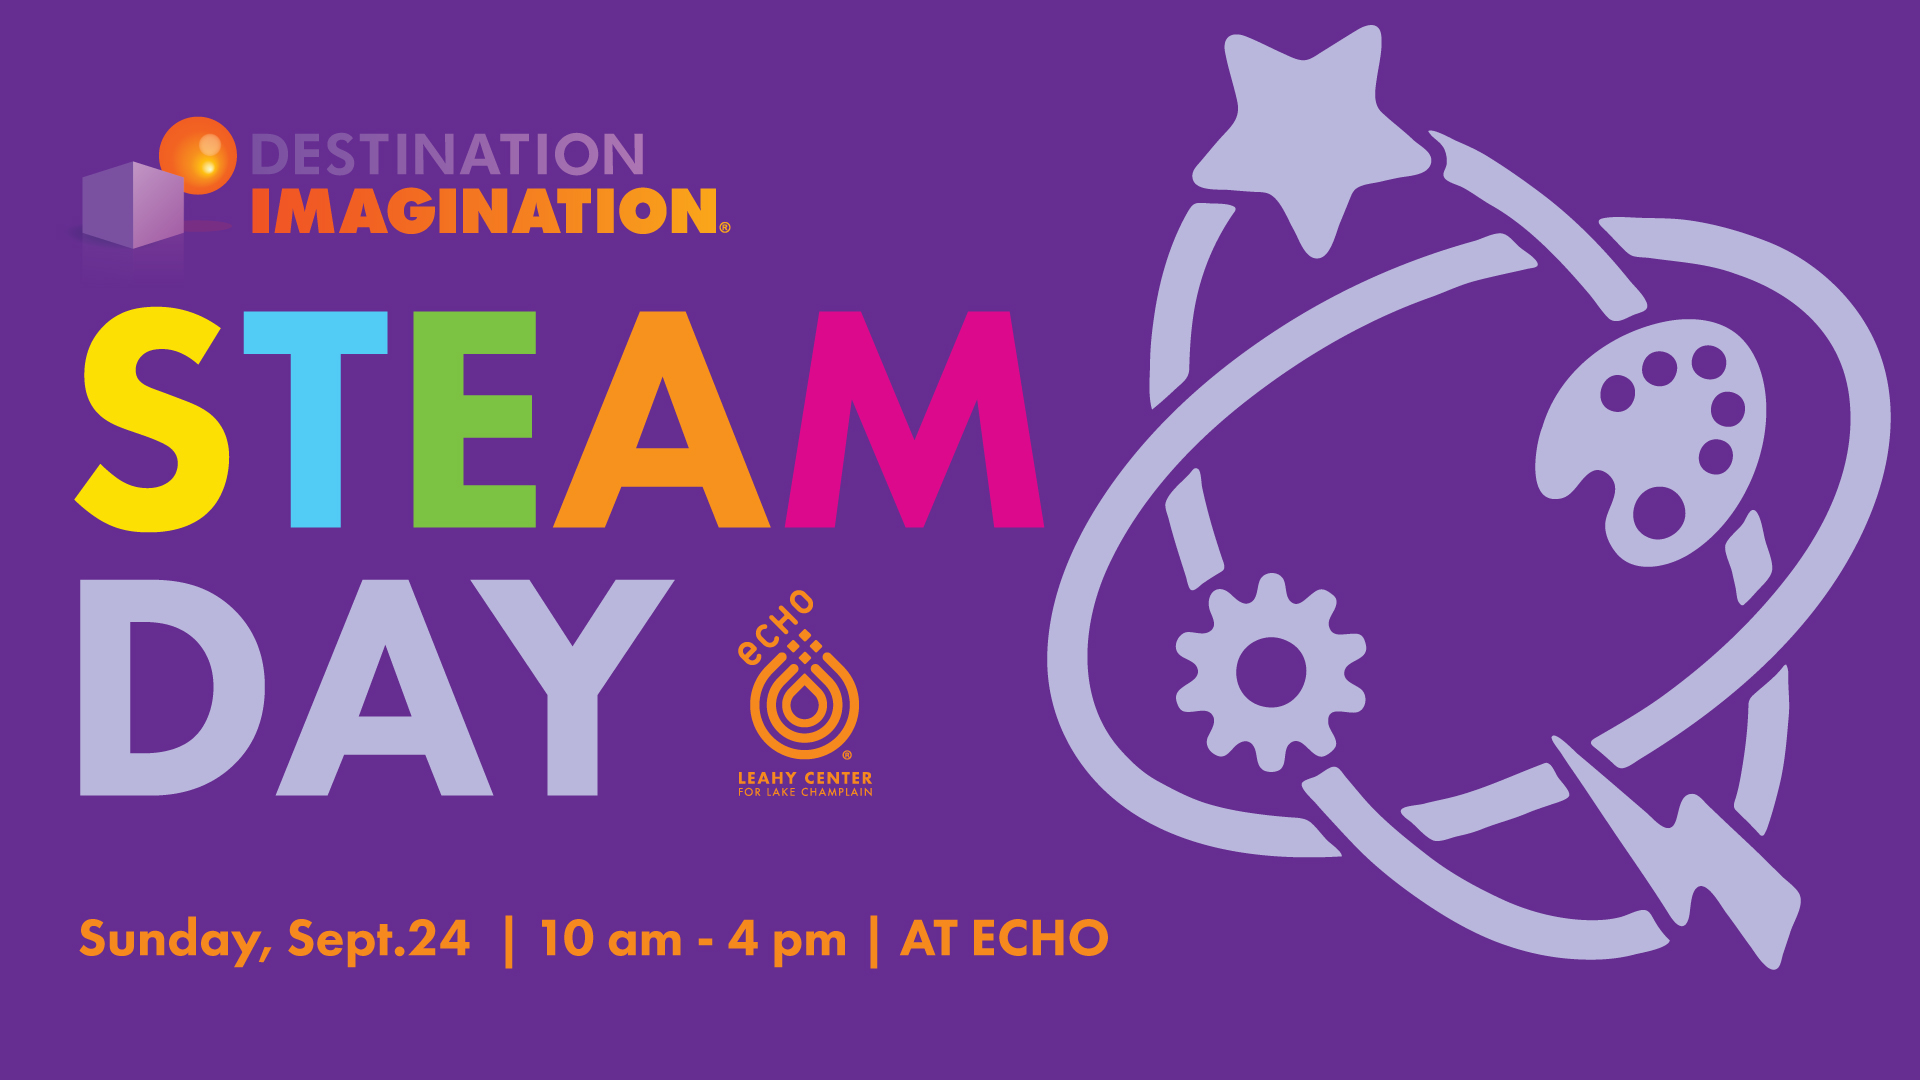 Destination Imagination STEAM Day at ECHO on Sunday, September 24, 10 am to 4 pm